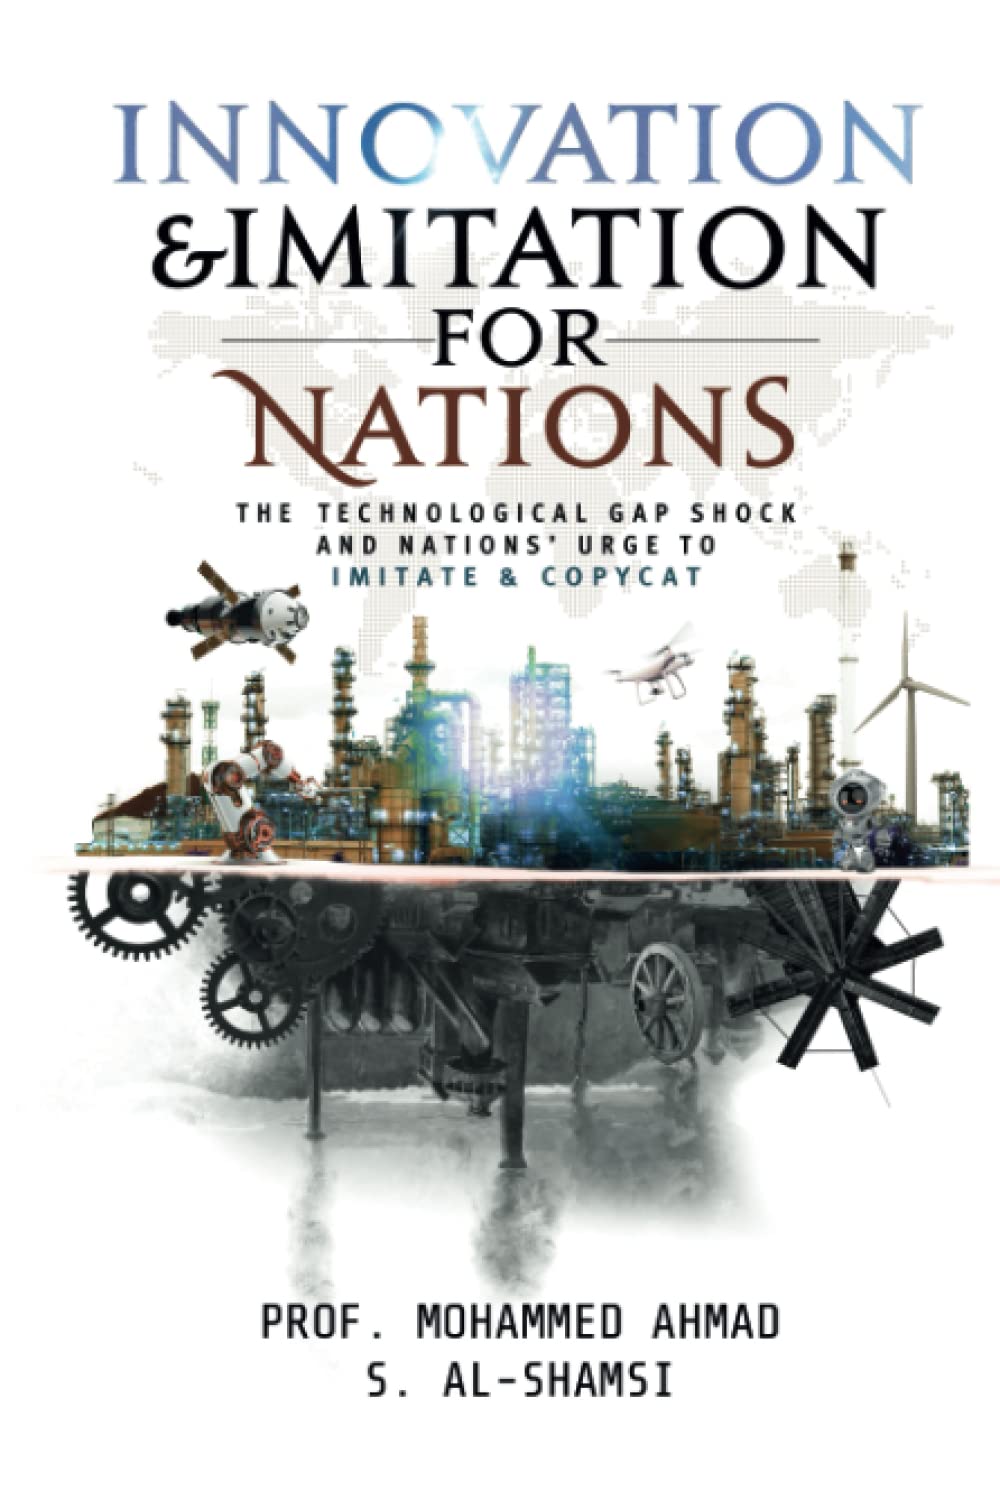 Innovation & Imitation For Nations: The Technological Gap Shock and Nations' Urge to Imitate and Copycat